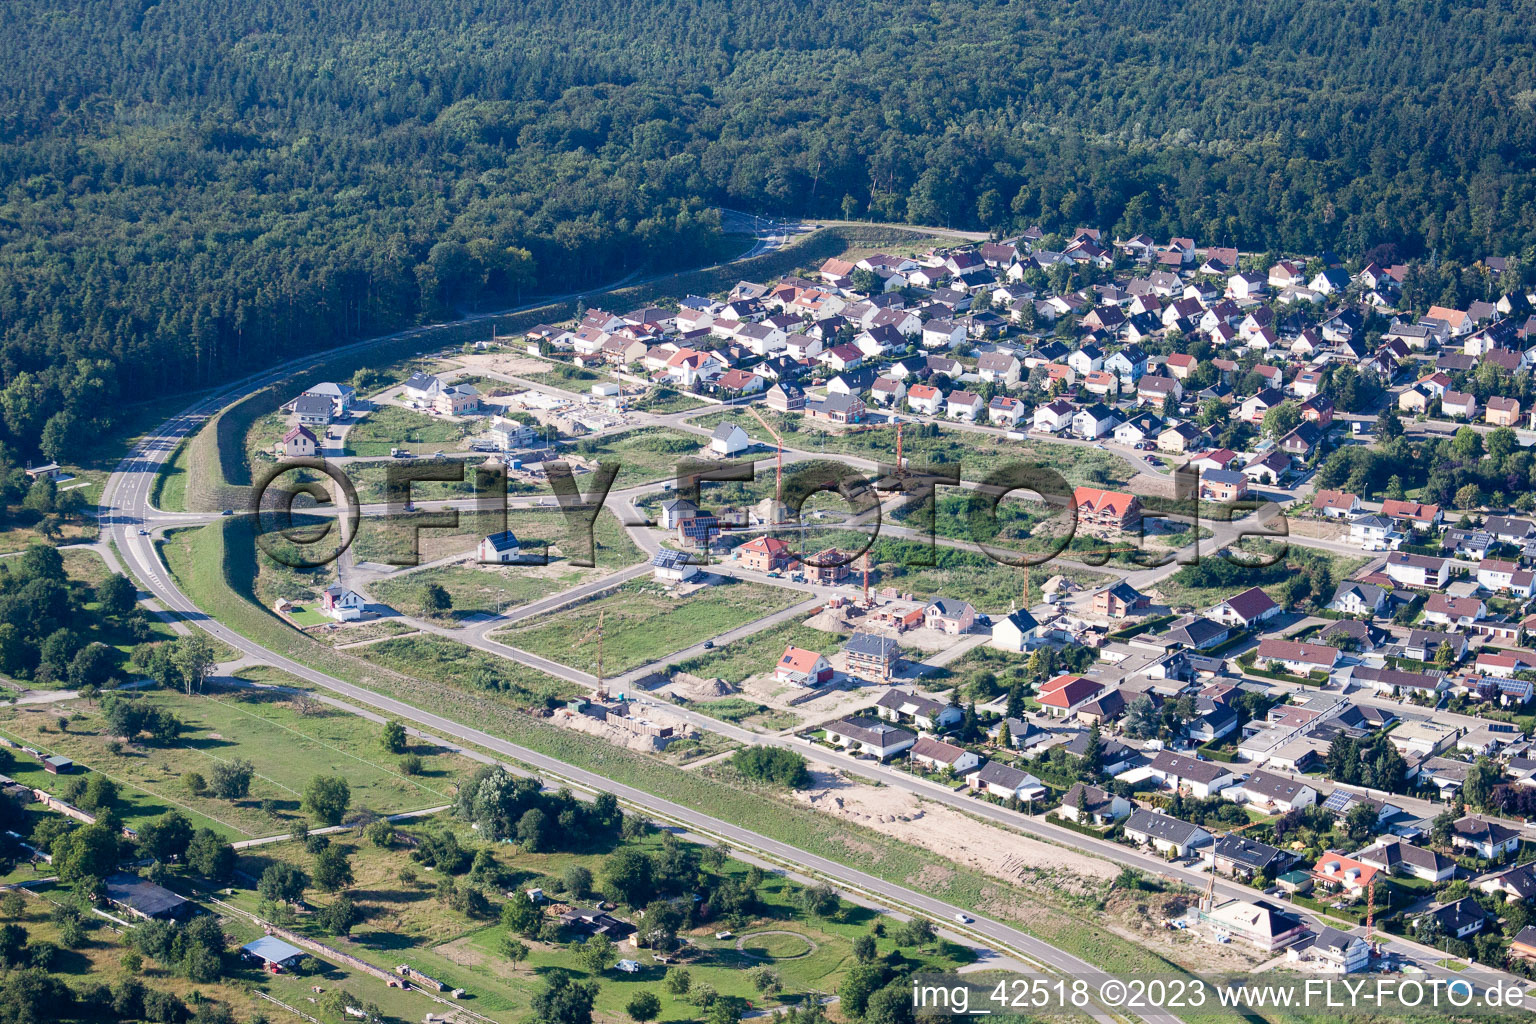 Drone recording of New development area west in Jockgrim in the state Rhineland-Palatinate, Germany